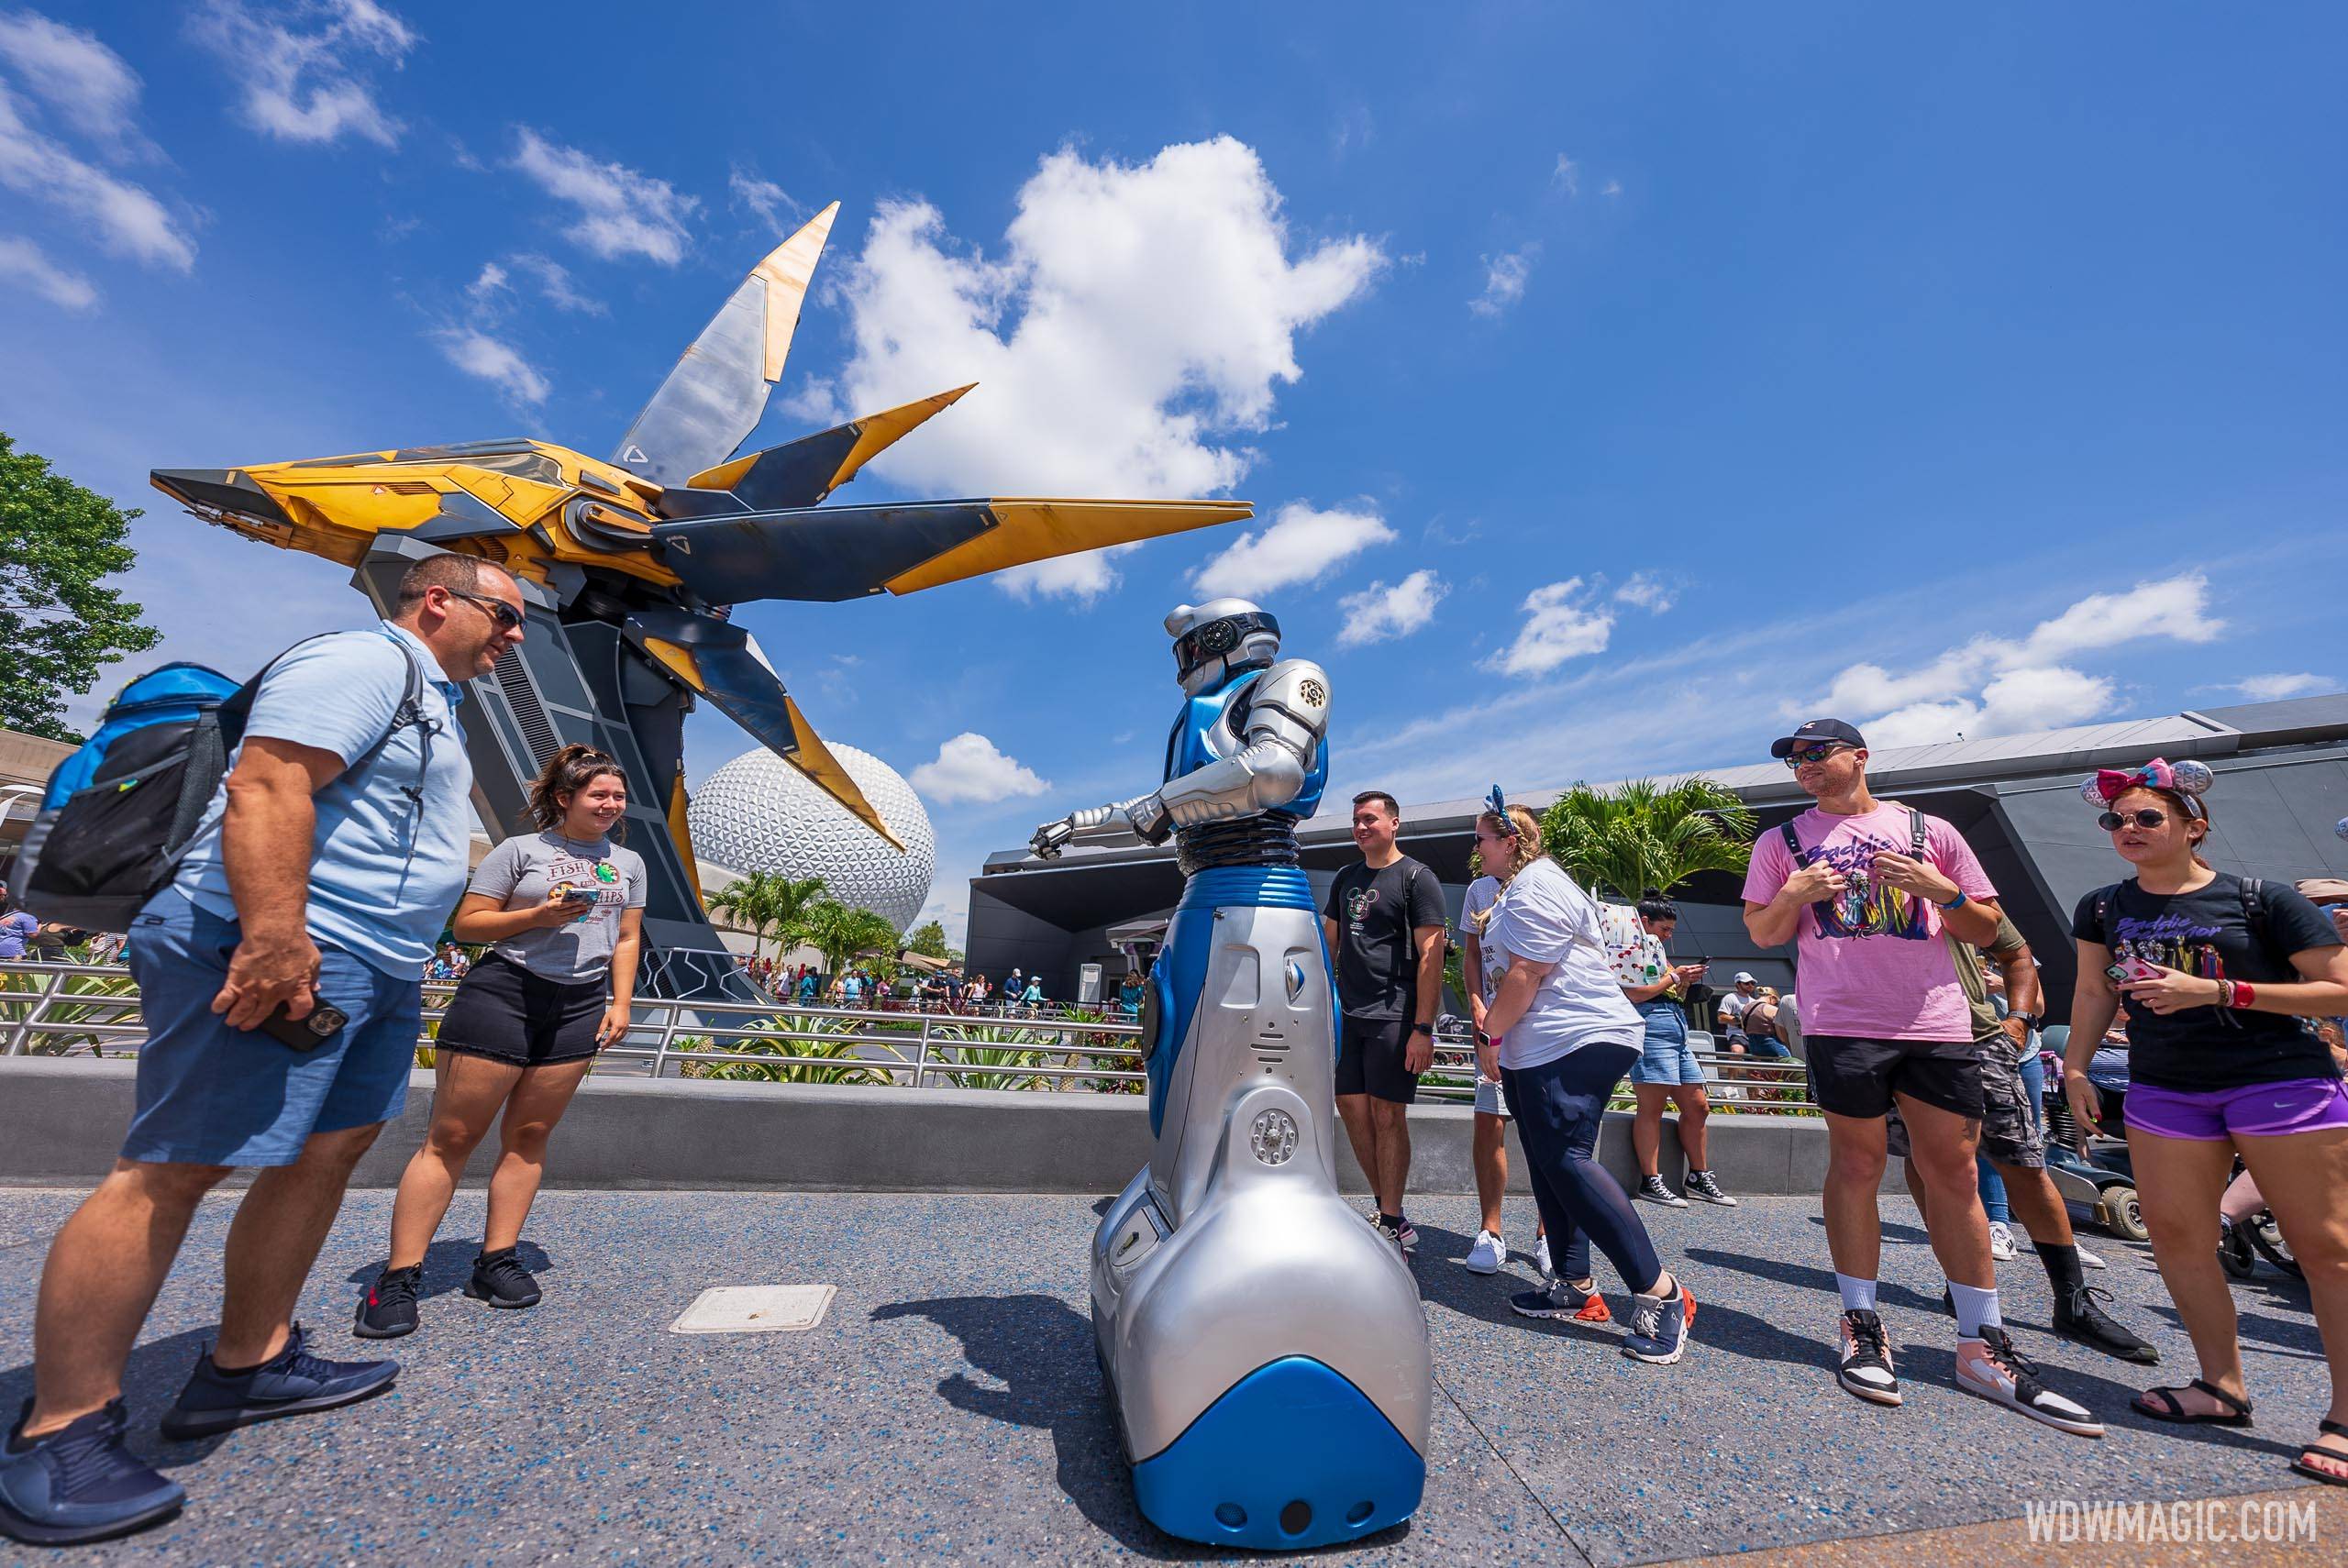 iCan Showbot debuts at EPCOT for the opening of Guardians of the Galaxy Cosmic Rewind